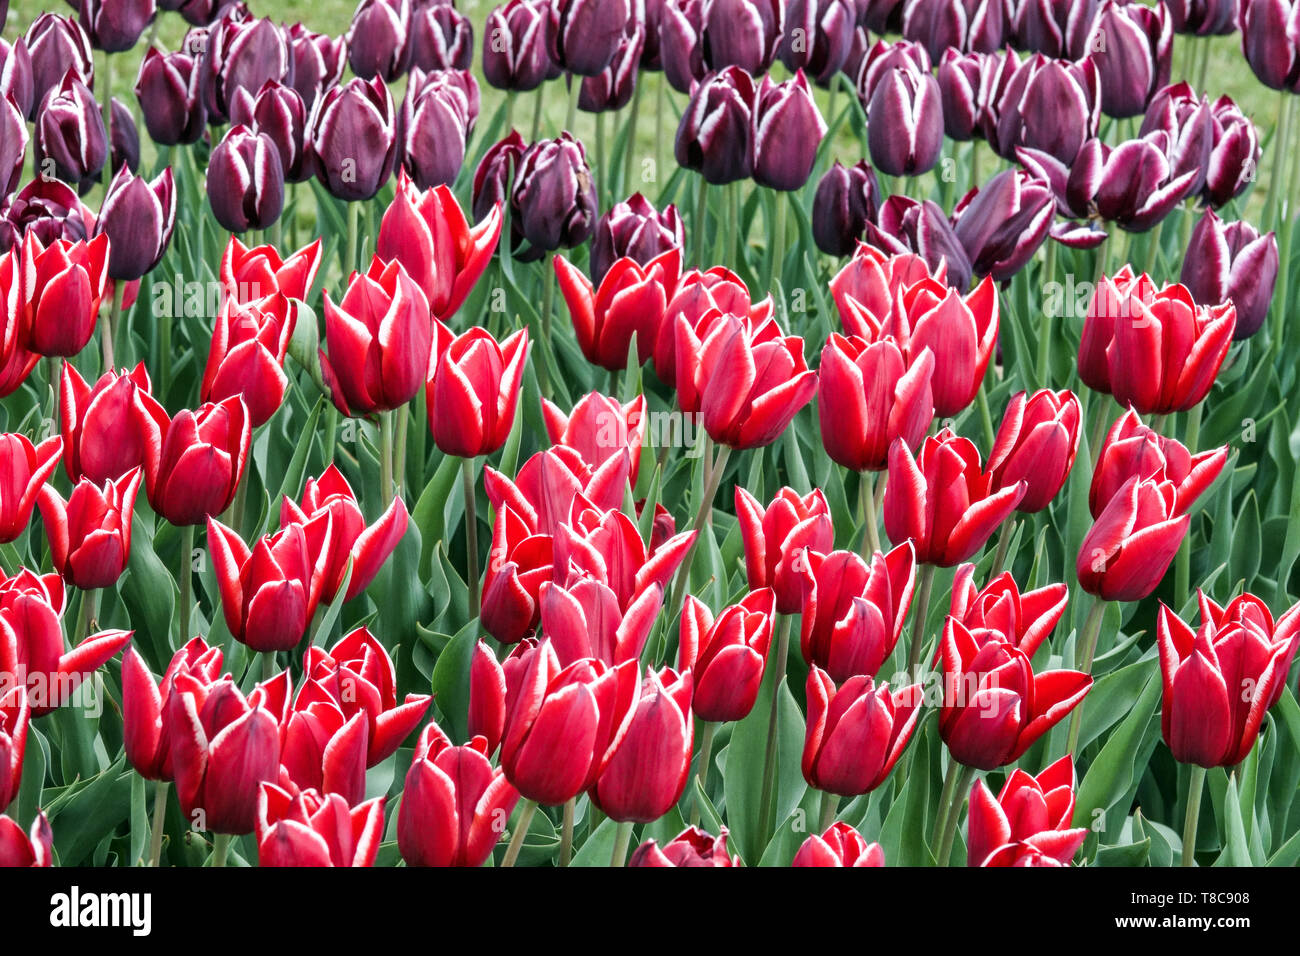 Colorful flower beds garden, mixed tulips, Red Tulips garden, red flowers spring garden Stock Photo